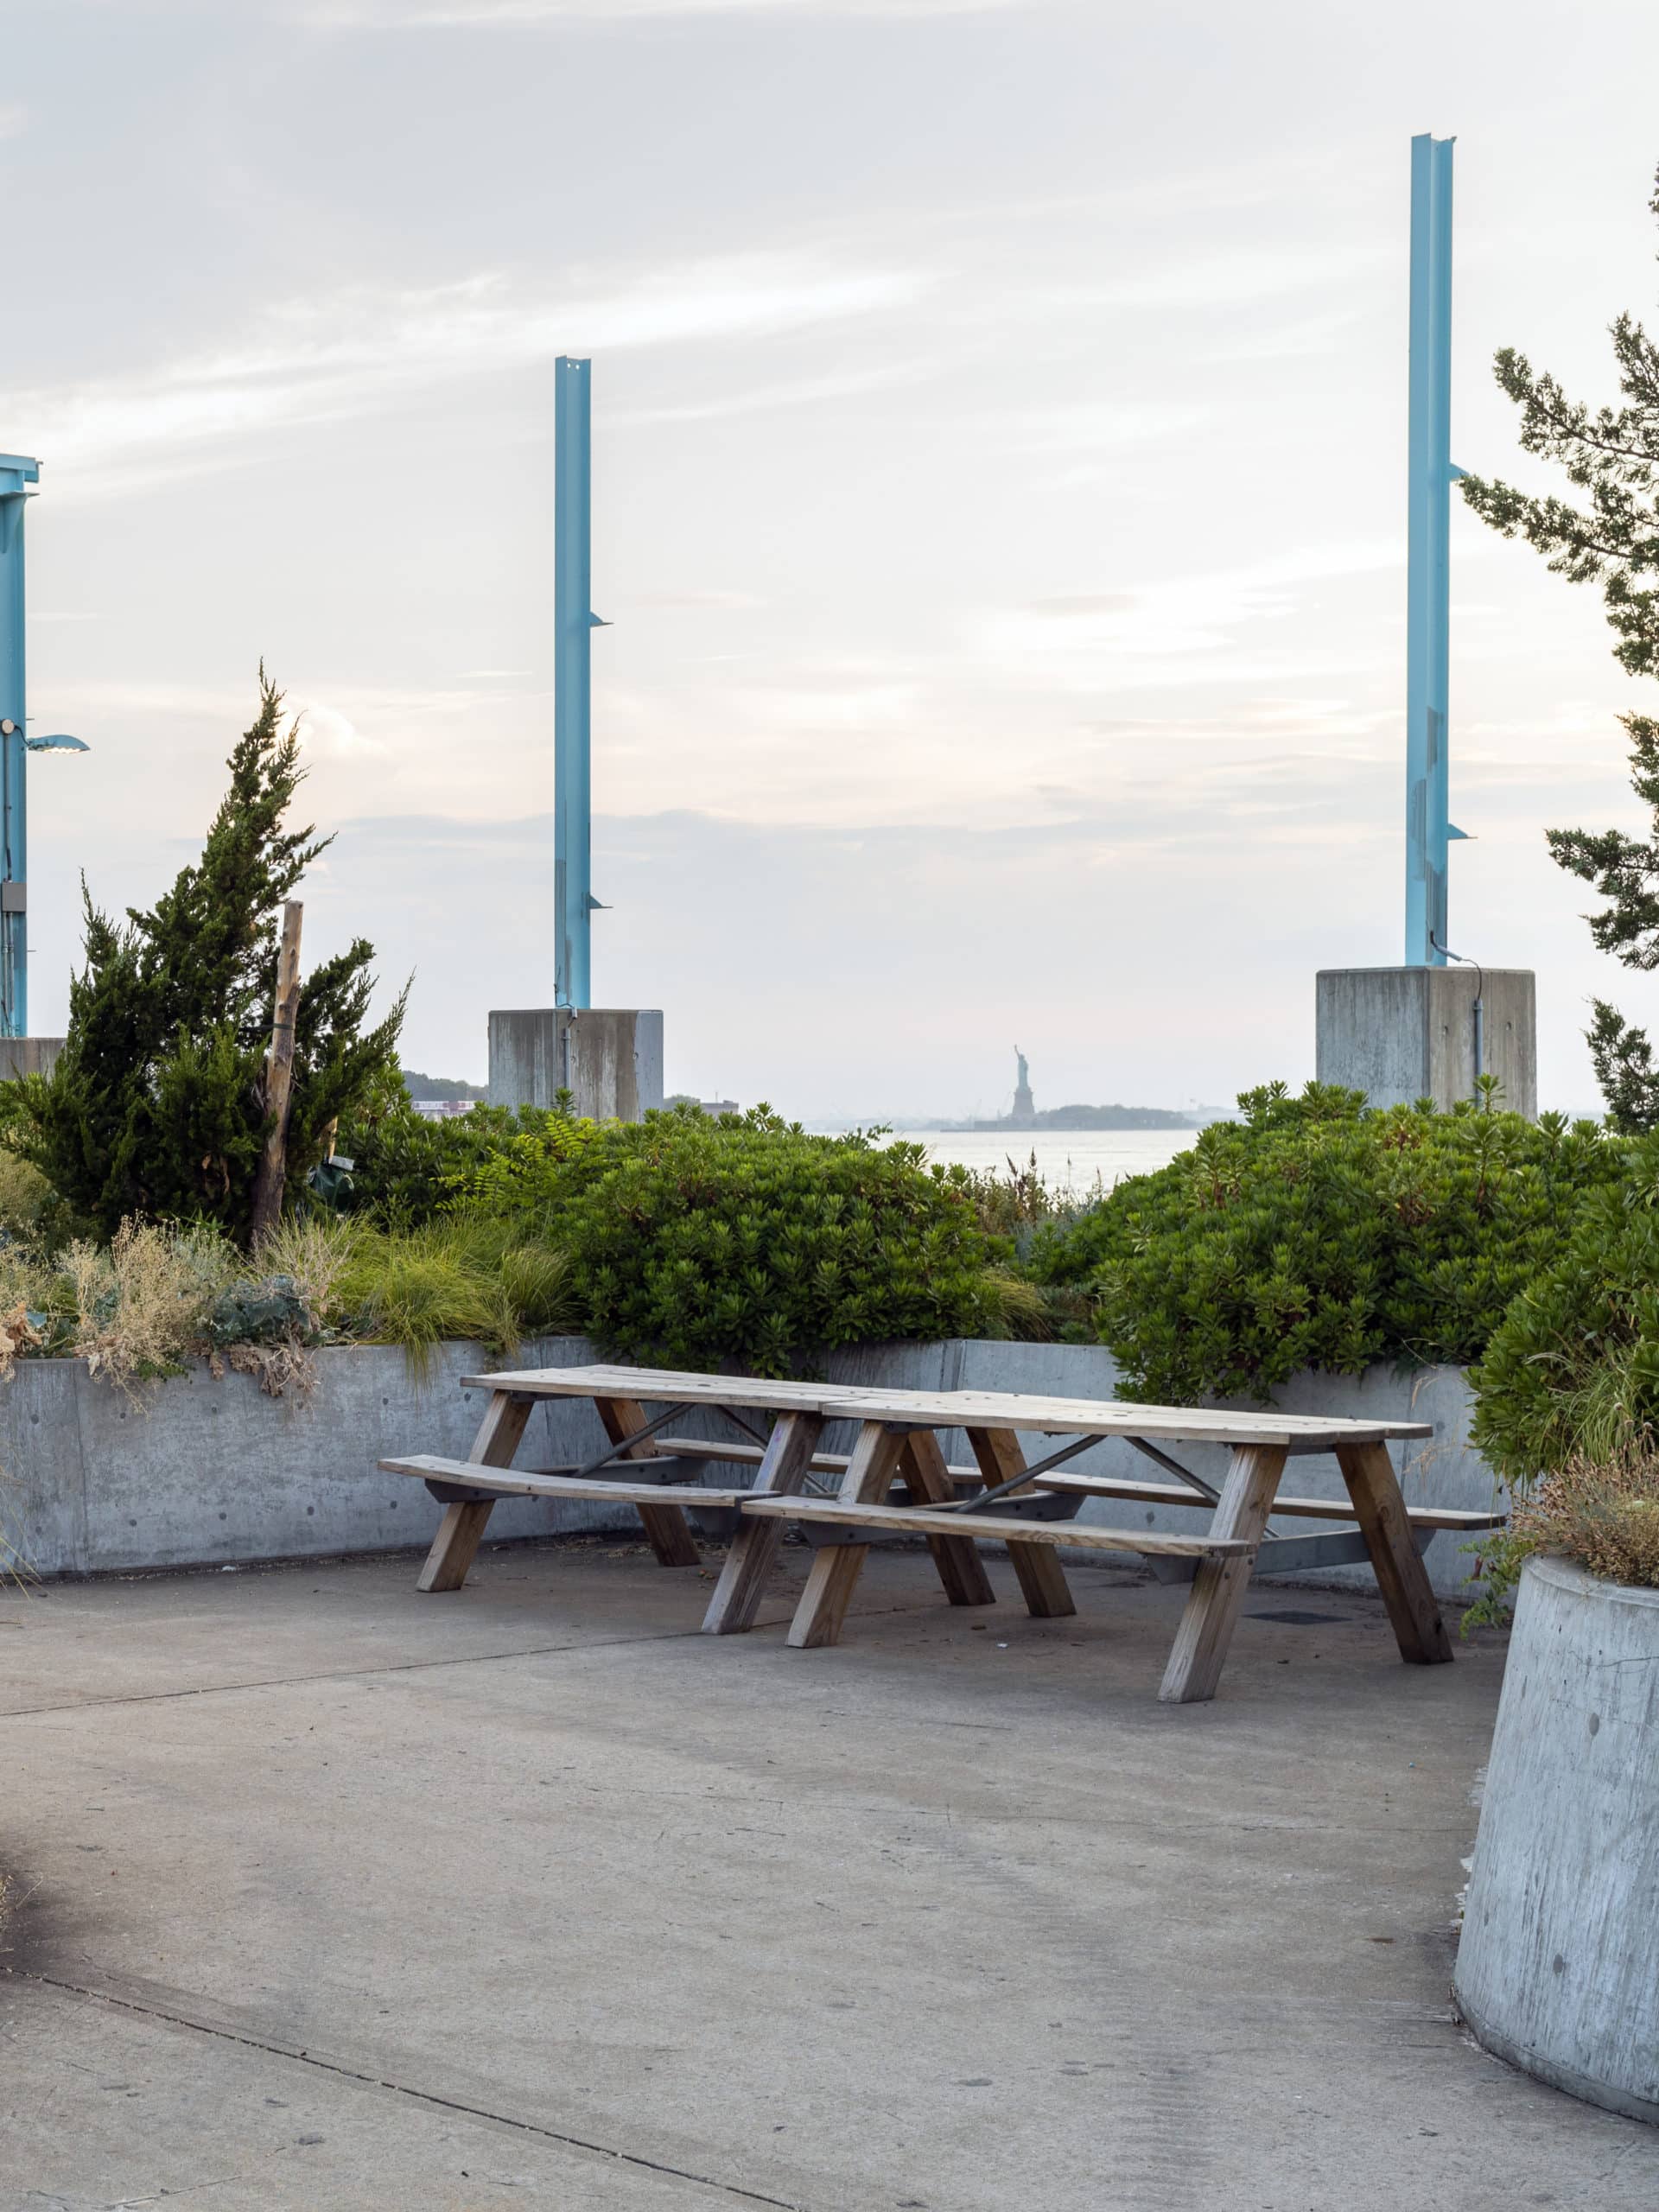 Picnic tables beside garden areas on Pier 3 at sunset. The Statue of Liberty is seen in the distance.